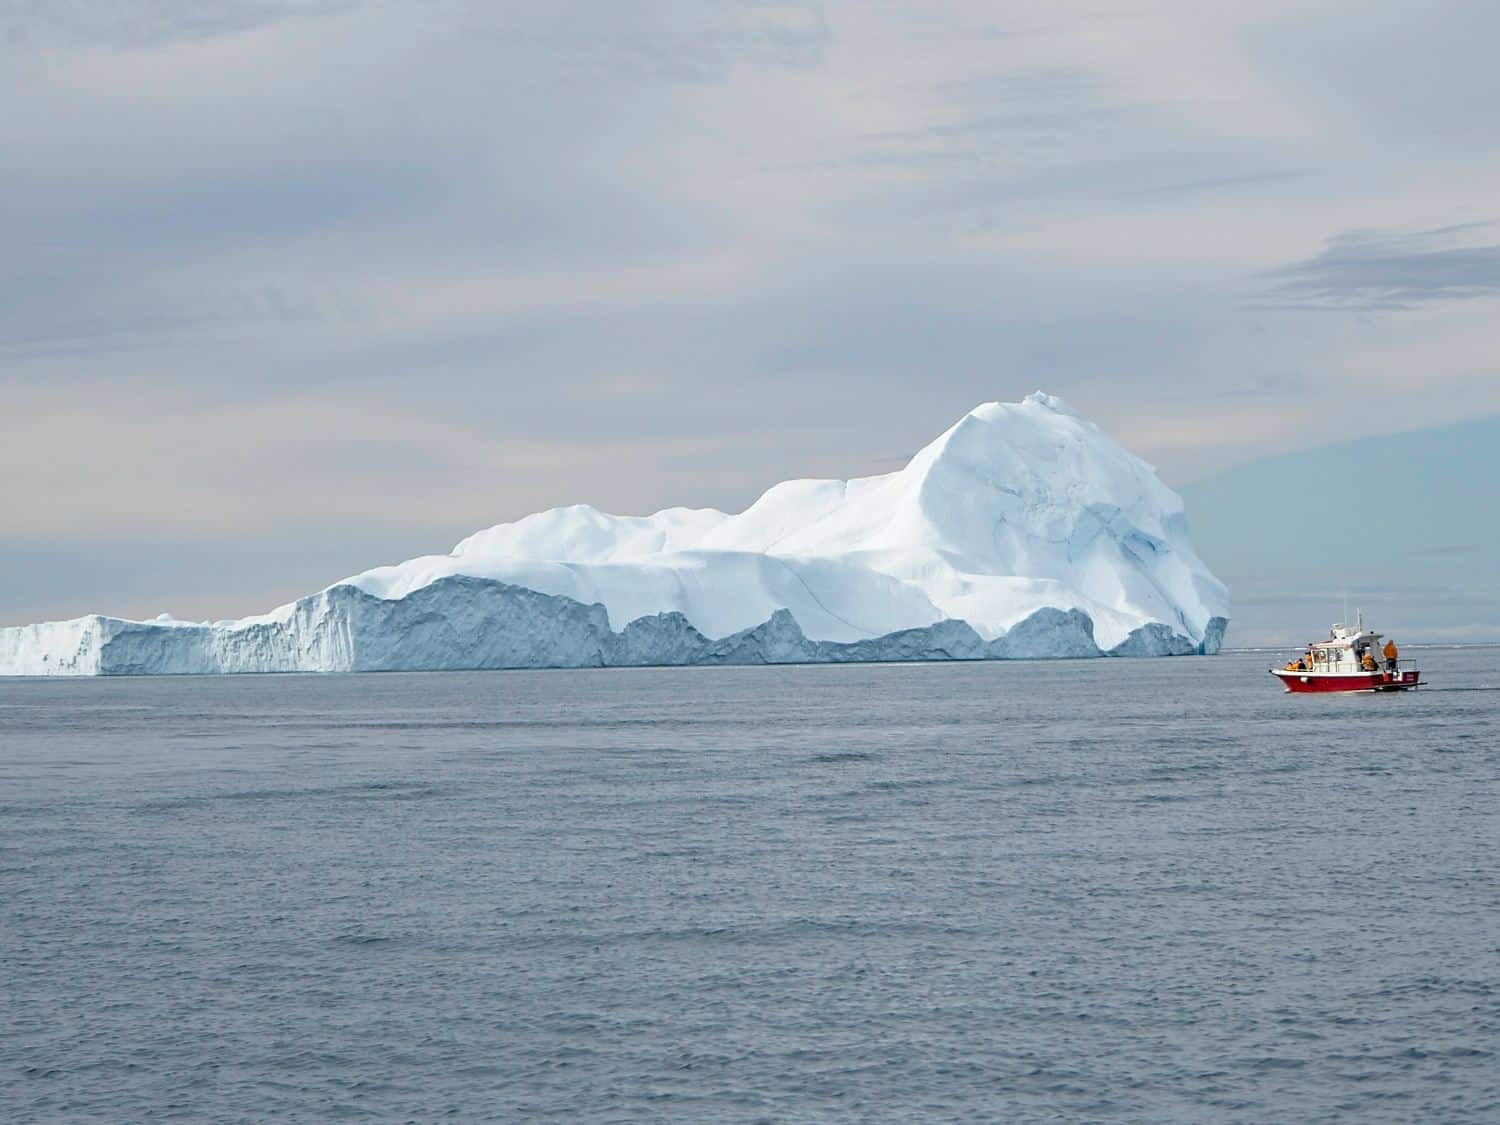 Ilulissat Icefjord Cruise Excursion: The Best Boat Tour